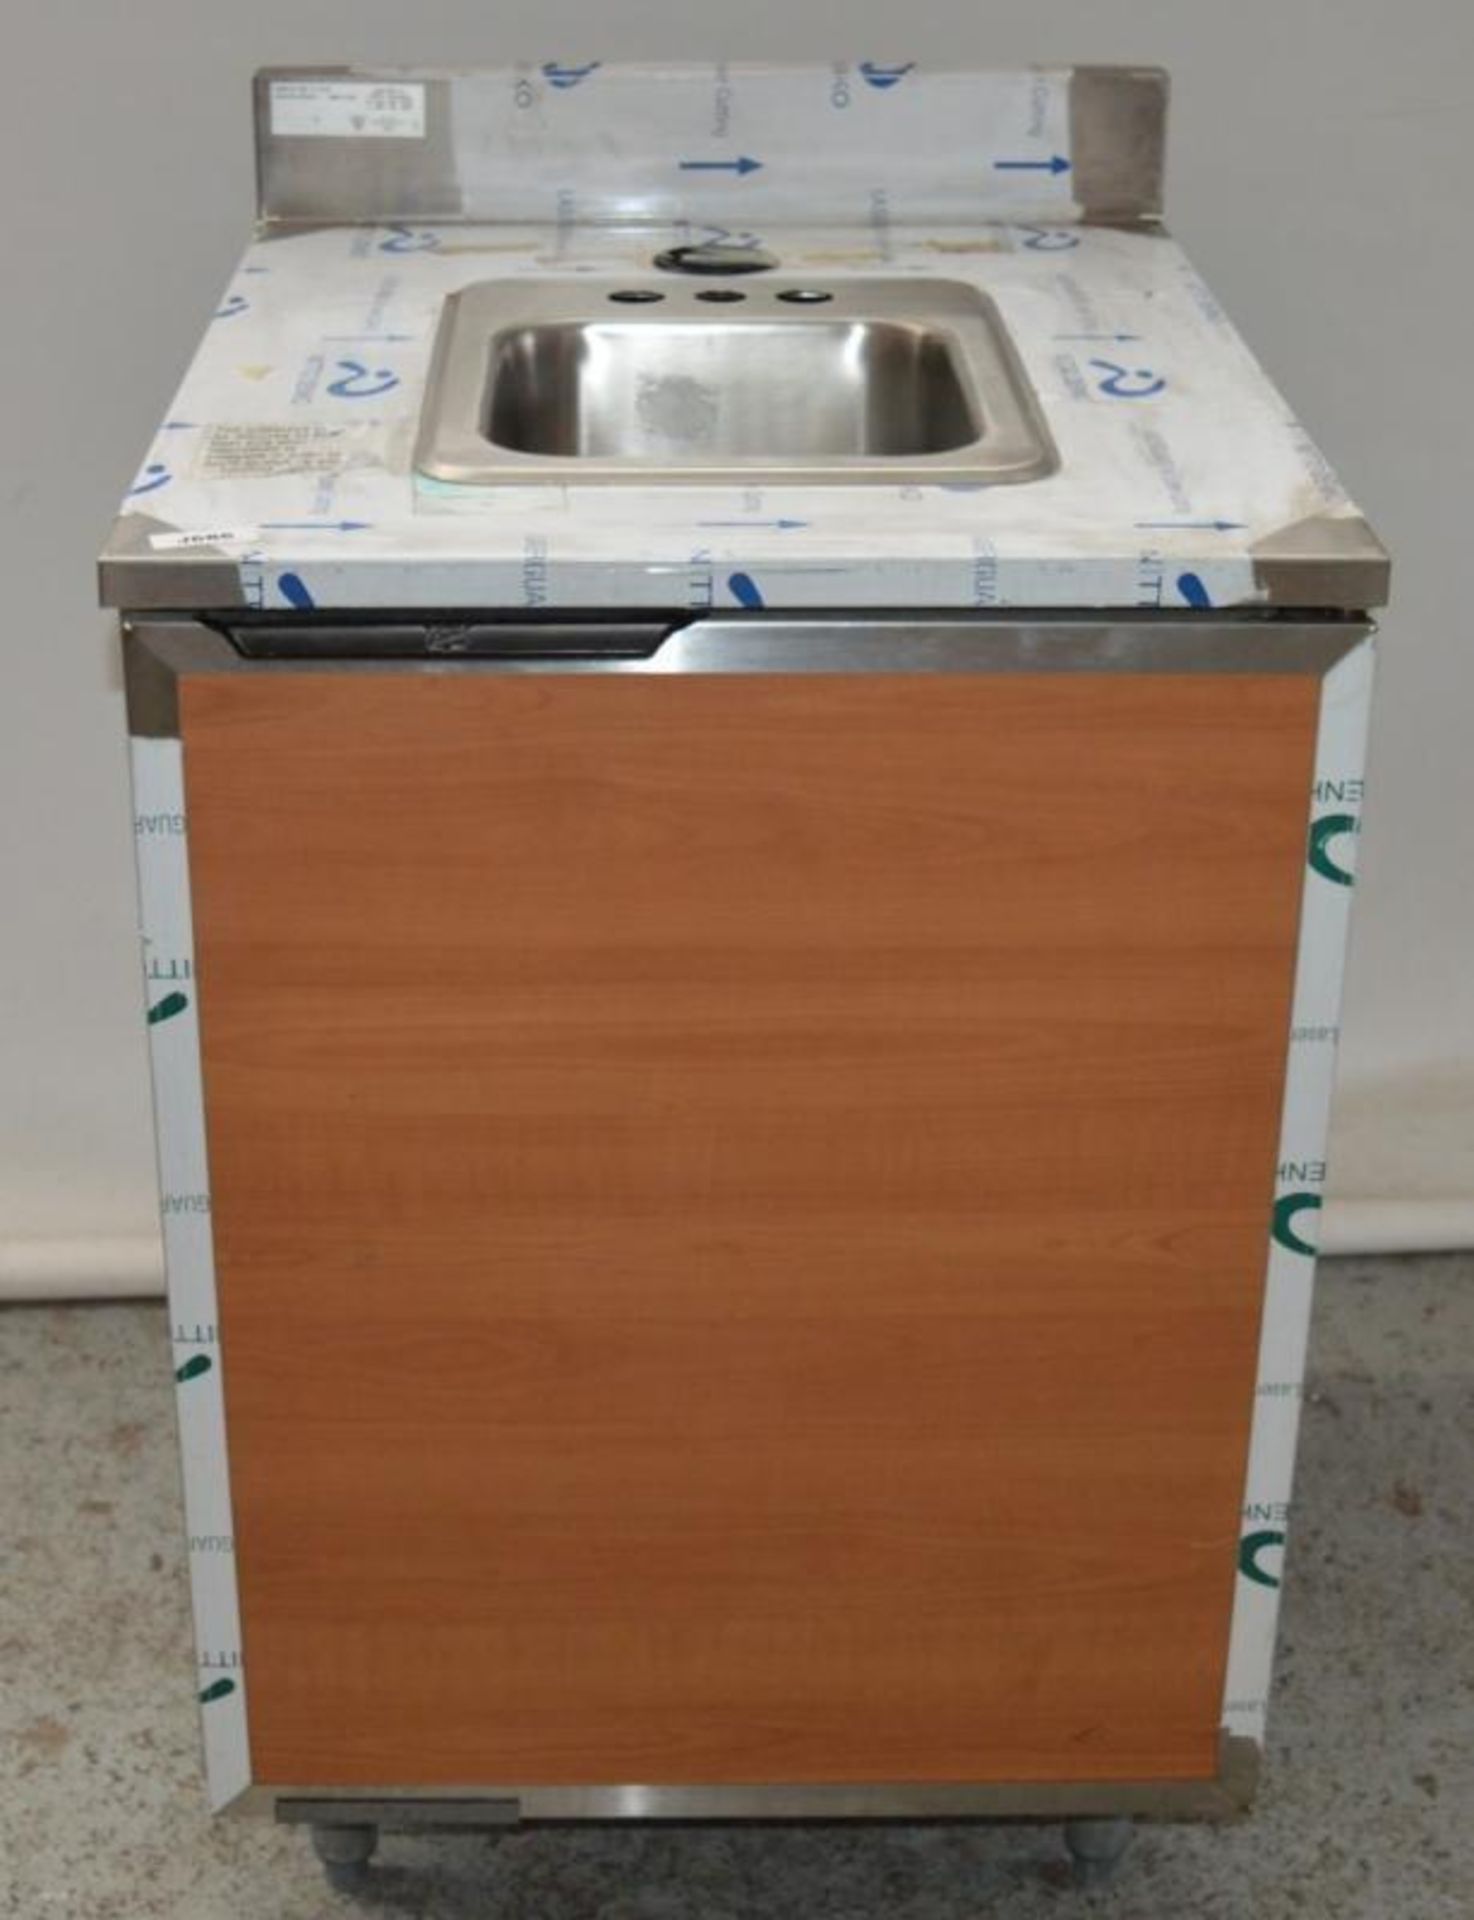 1 x Duke Stainless Steel Sink Basin Unit With Wood Finish Cabinet - Unused With Protective Film Atta - Image 5 of 7